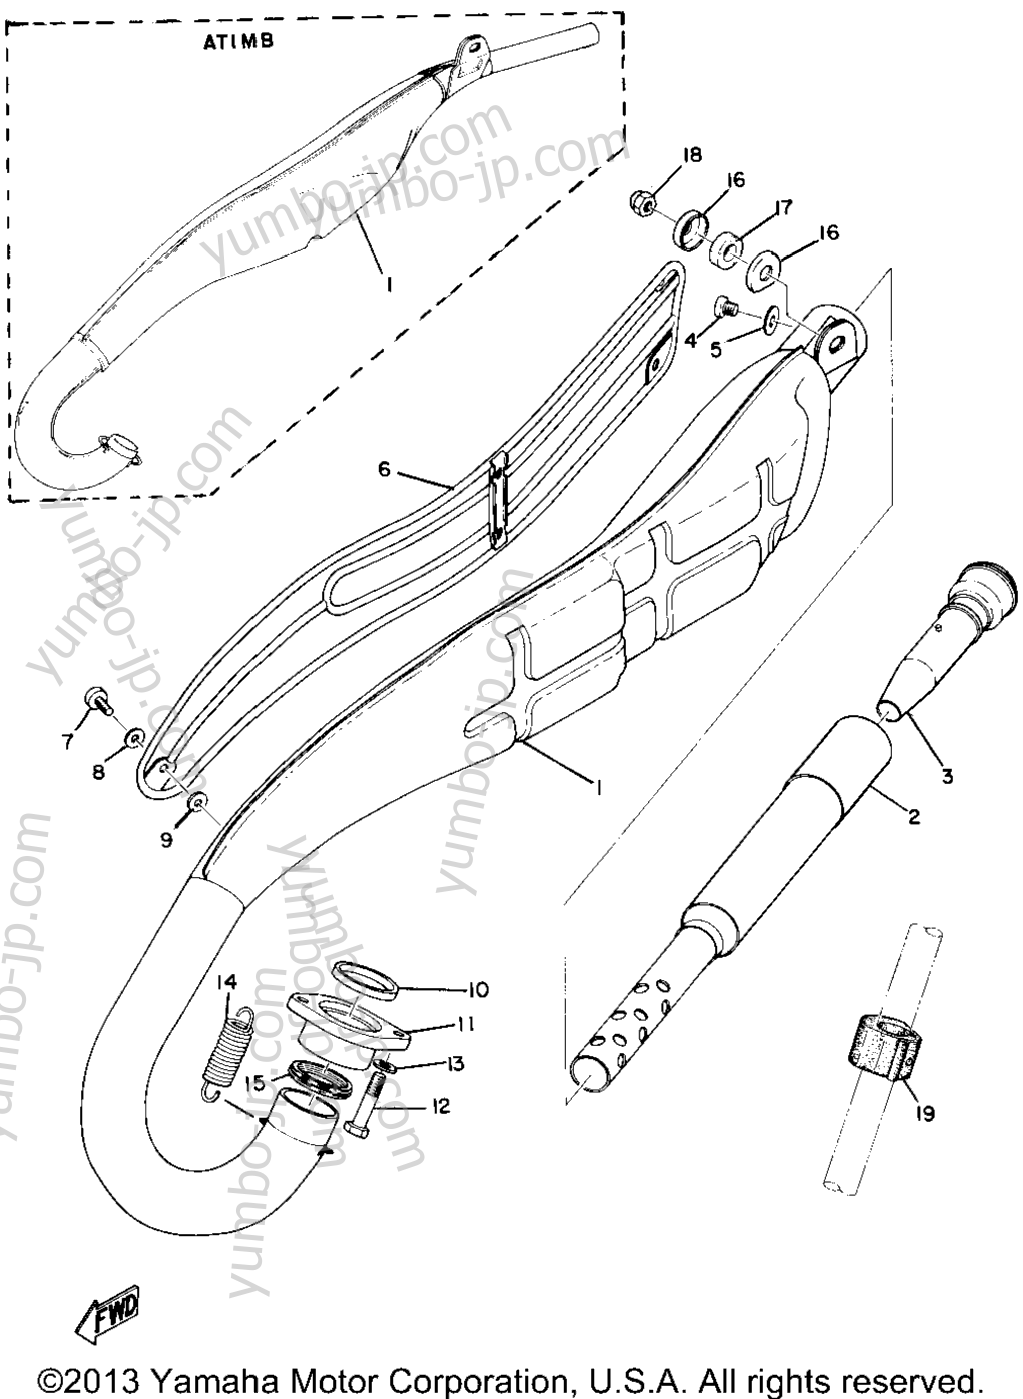 Exhaust for motorcycles YAMAHA AT1B 1970 year